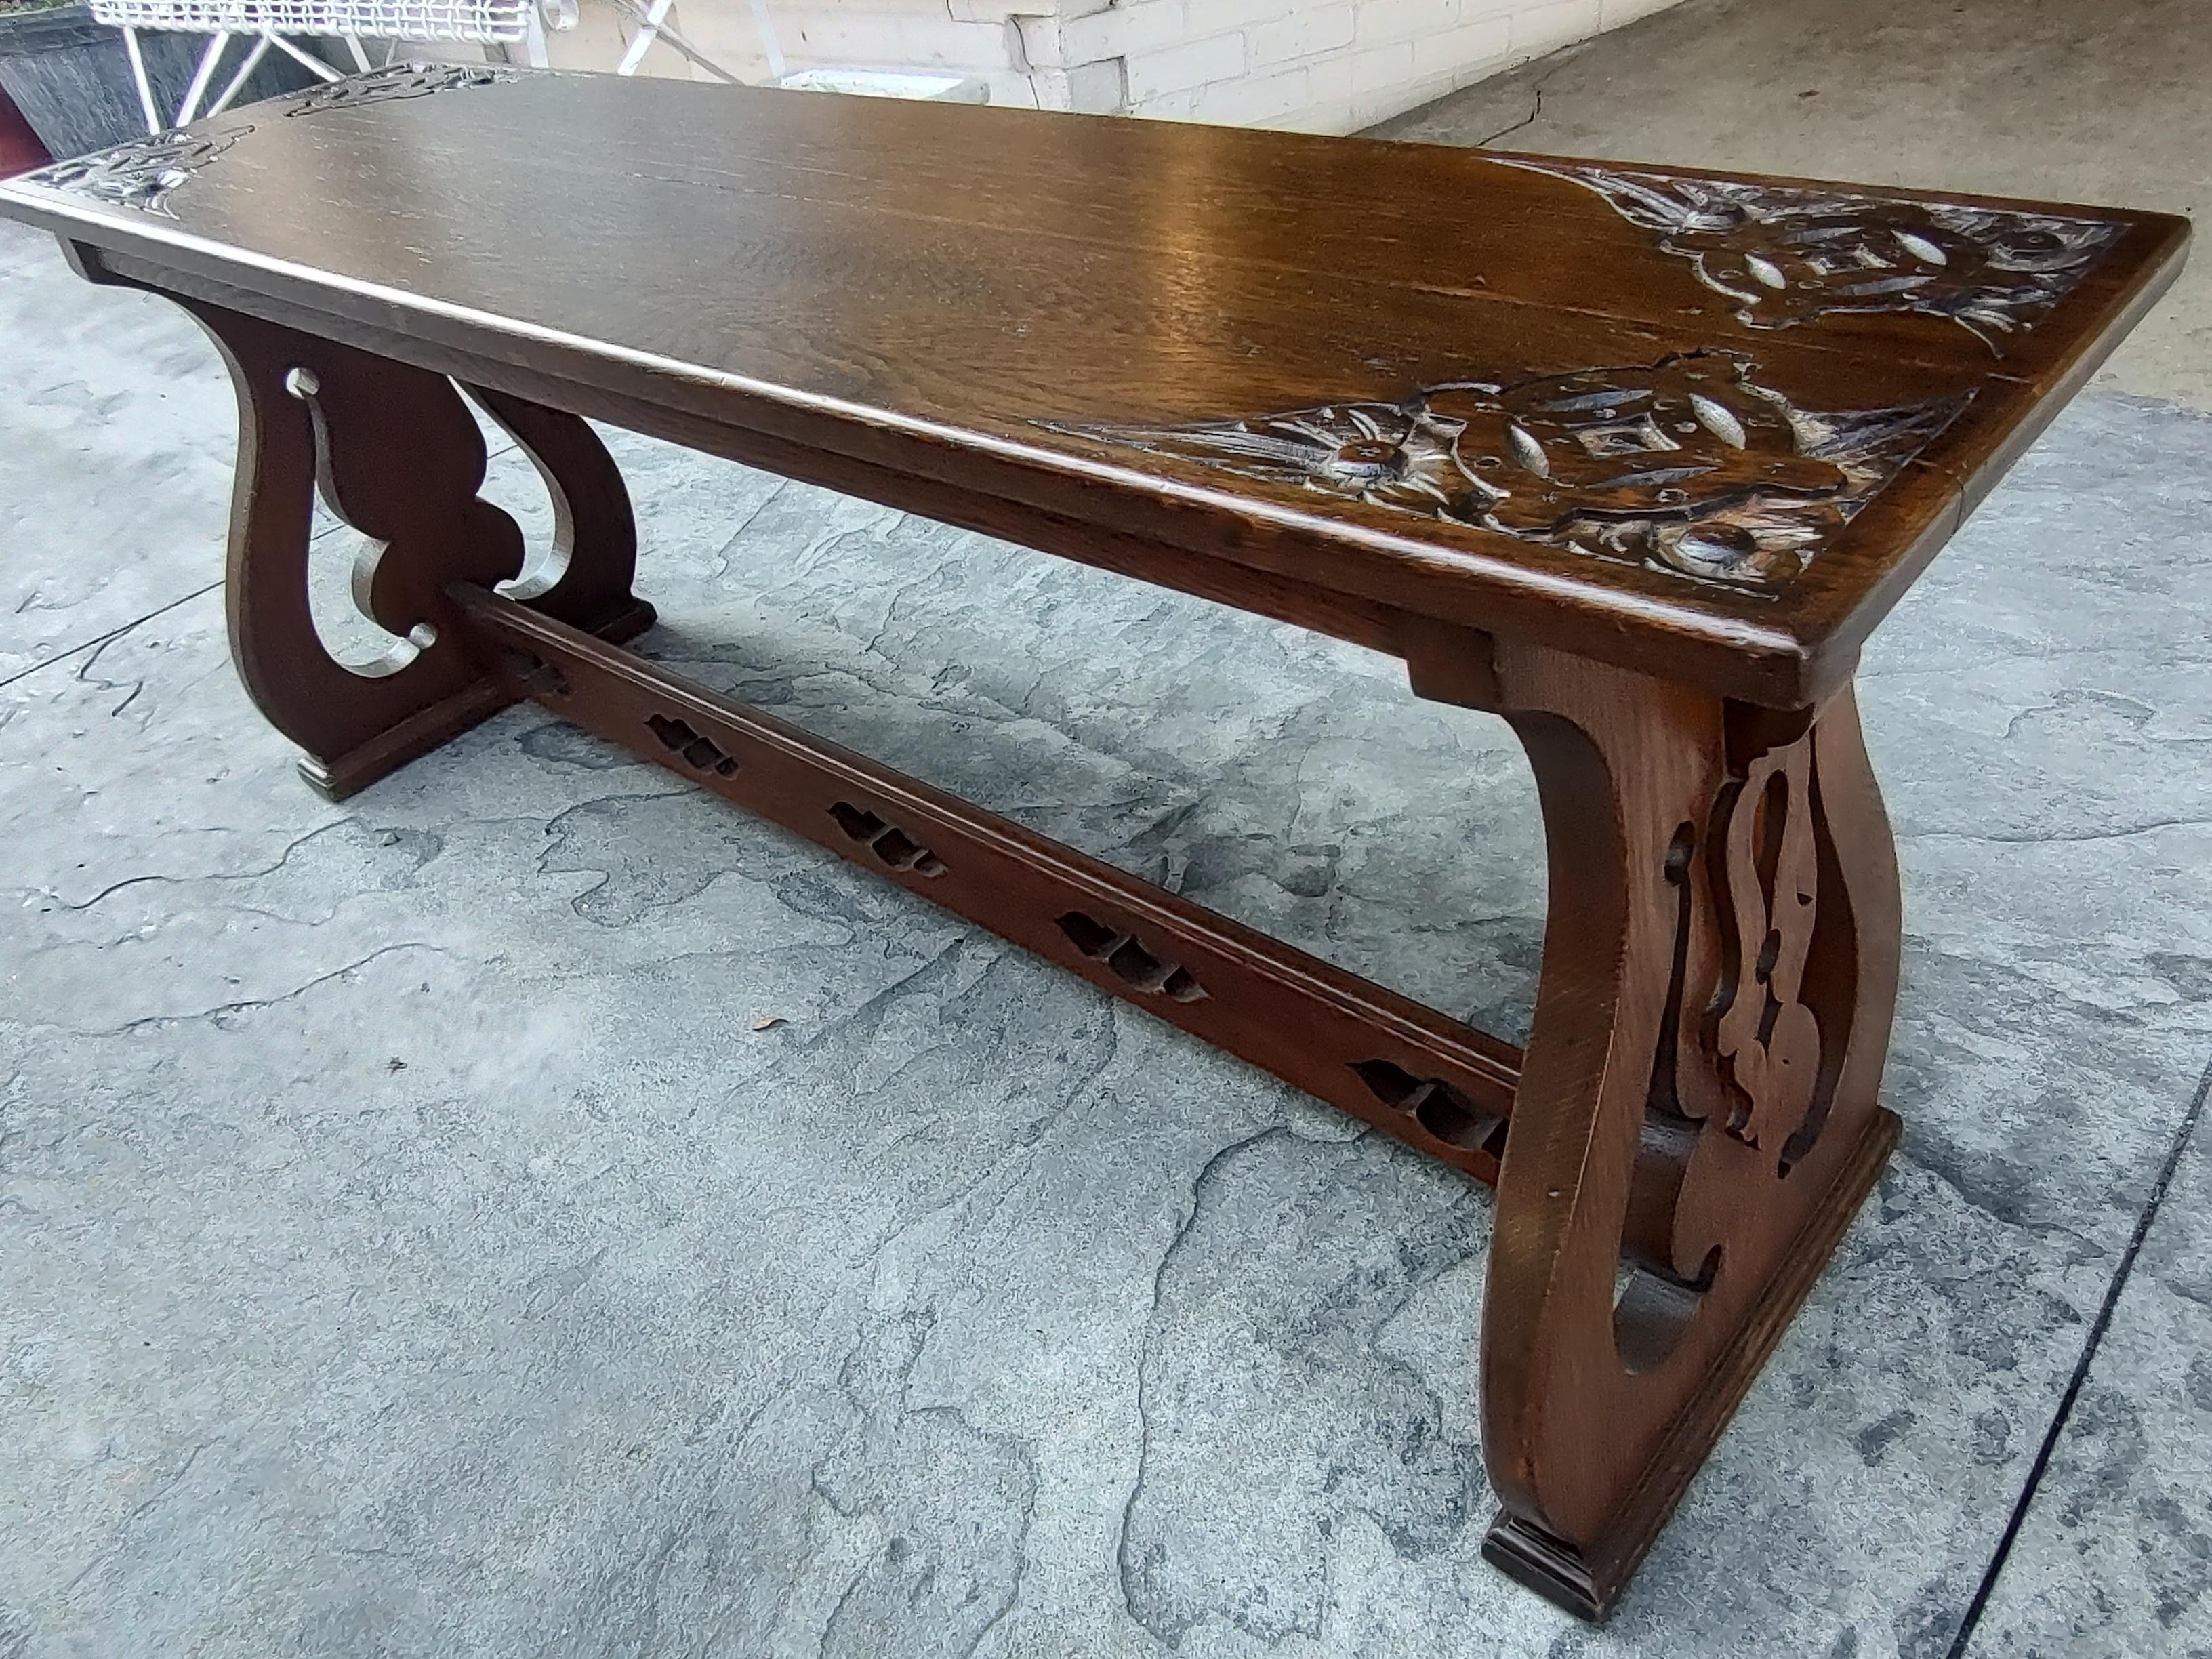 Simple and elegant oak Altar bench from about 1910. Hand carved Christian Symbolism on top ends. In excellent antique condition with minimal wear. Just refinished. Measures: 48 x 13.